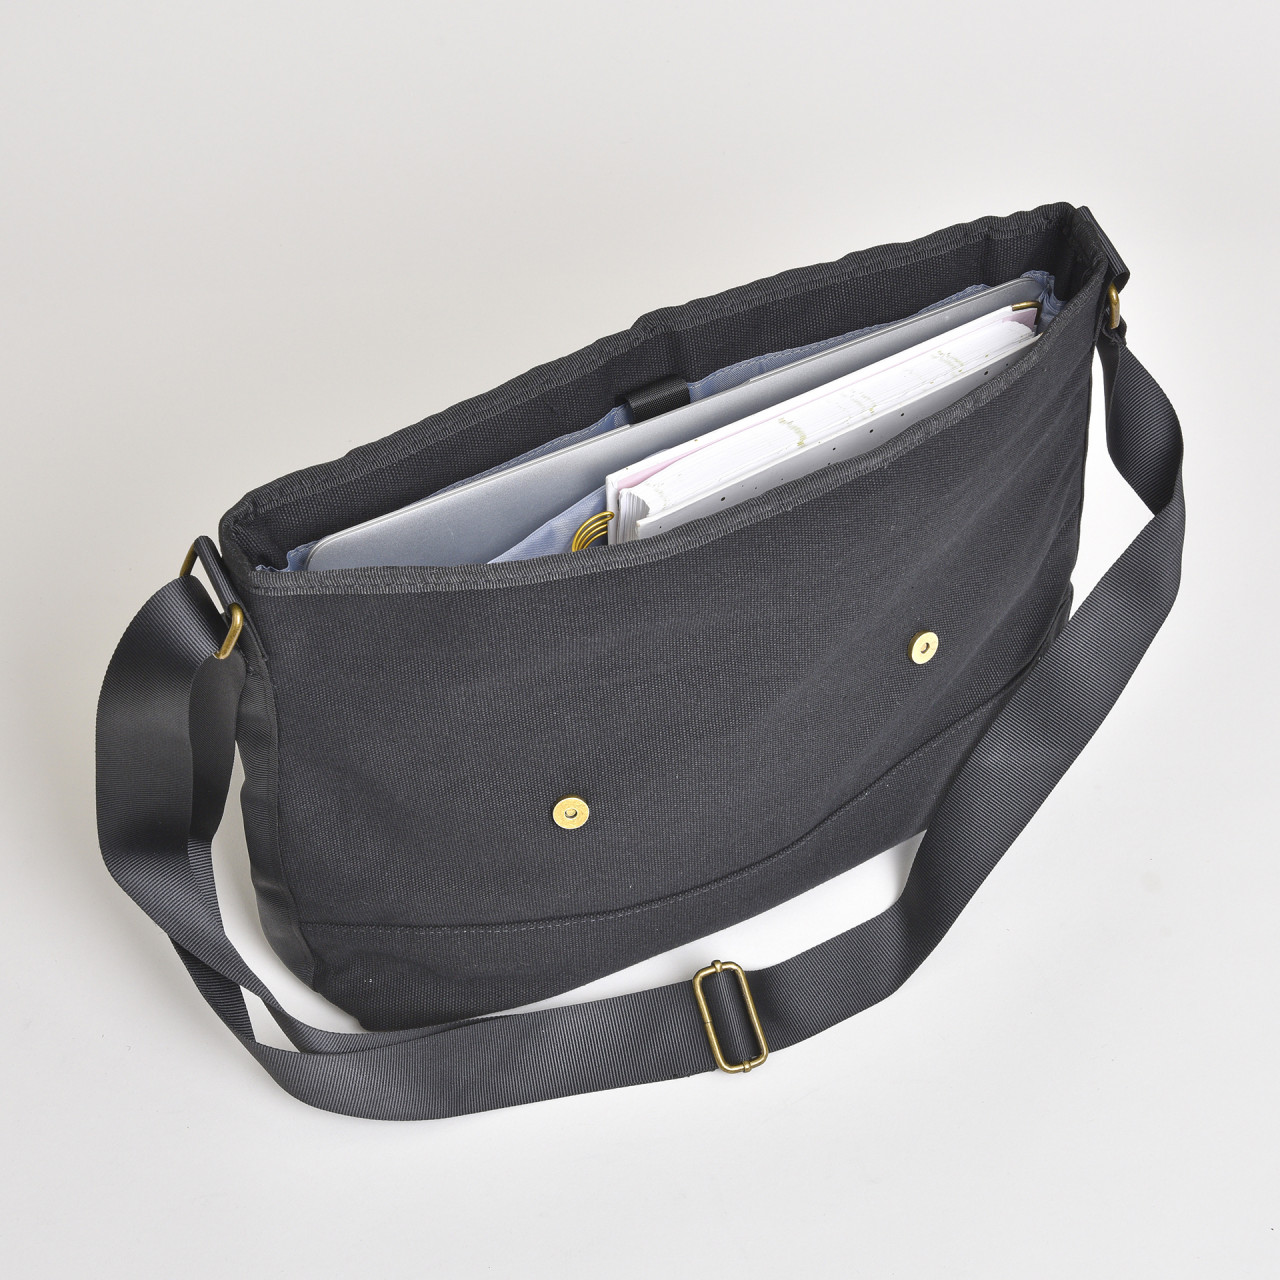 Downtown Messenger Bag | A leading supplier of promotional products to ...